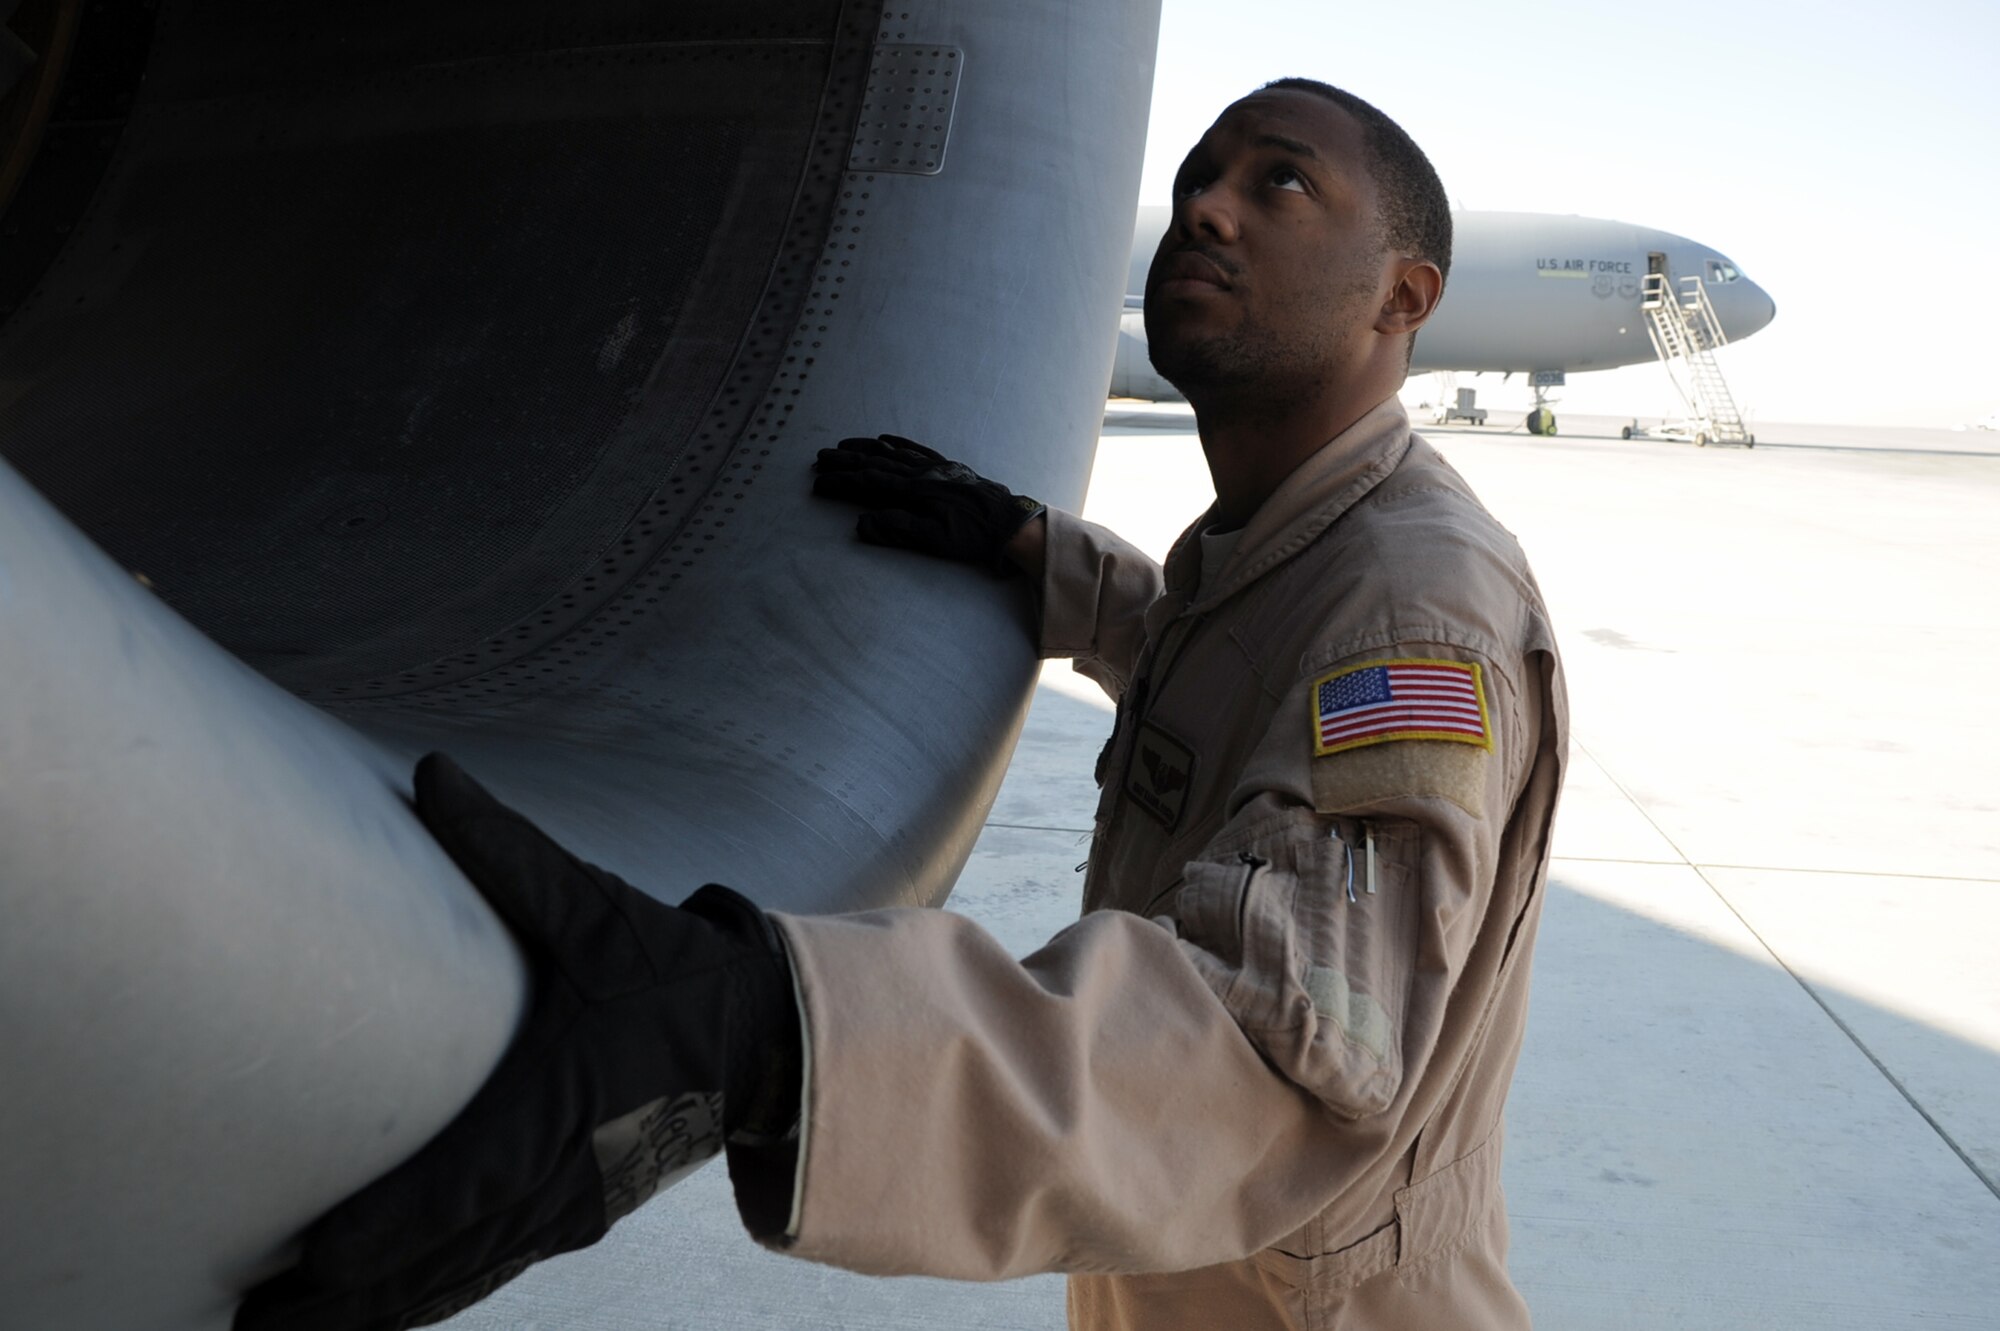 Staff Sgt. Kaamil Coston, KC-10 Extender flight engineer with the 908th Expeditionary Air Refueling Squadron at a non-disclosed base in Southwest Asia, checks an engine of a KC-10 Jan. 8, 2009.  Sergeant Coston, deployed from the 2nd Air Refueling Squadron at McGuire Air Force Base, N.J., ensures the KC-10 is ready to fly when a mission is prepared -- essentially the "systems expert" for the airframe.  The KC-10 is an Air Mobility Command advanced tanker and cargo aircraft designed to provide increased global mobility for U.S. armed forces. Although the KC-l0's primary mission is aerial refueling, it can combine the tasks of a tanker and cargo aircraft by refueling fighters and simultaneously carry the fighter support personnel and equipment on overseas deployments. Sergeant Coston's hometown is Staten Island, N.Y.  (U.S. Air Force Photo/Tech. Sgt. Scott T. Sturkol/Released) 